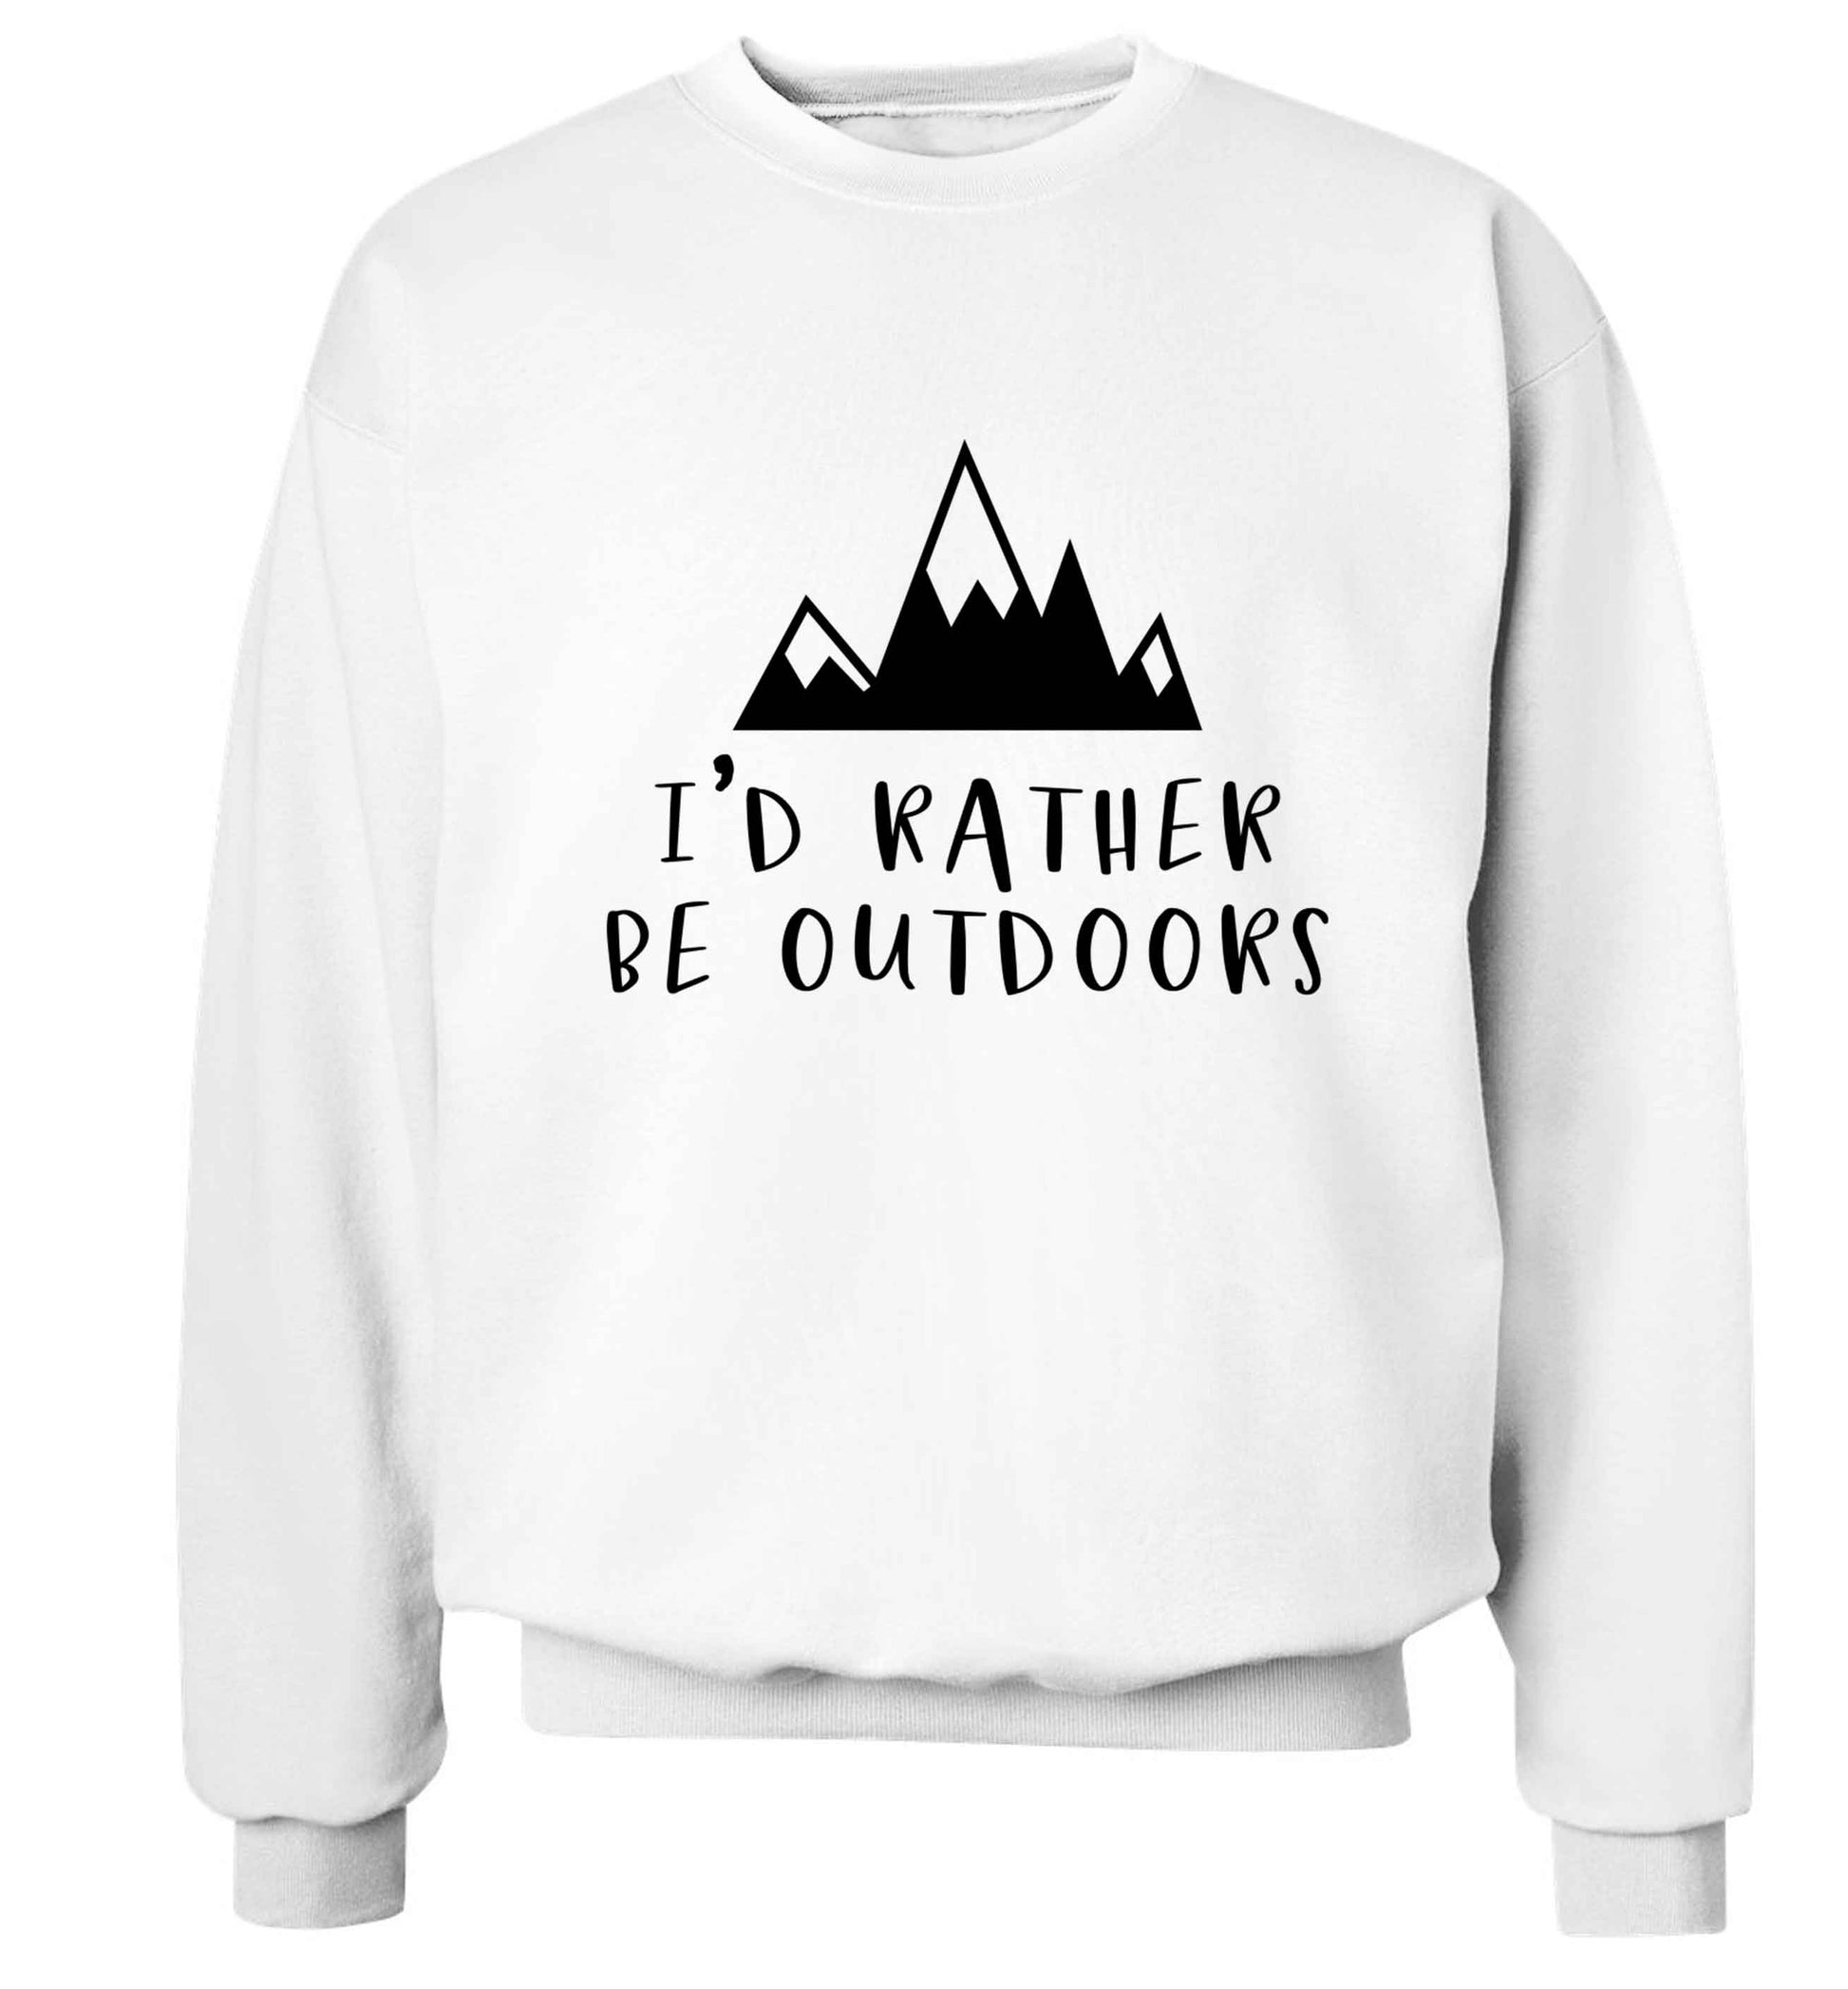 I'd rather be outdoors Adult's unisex white Sweater 2XL